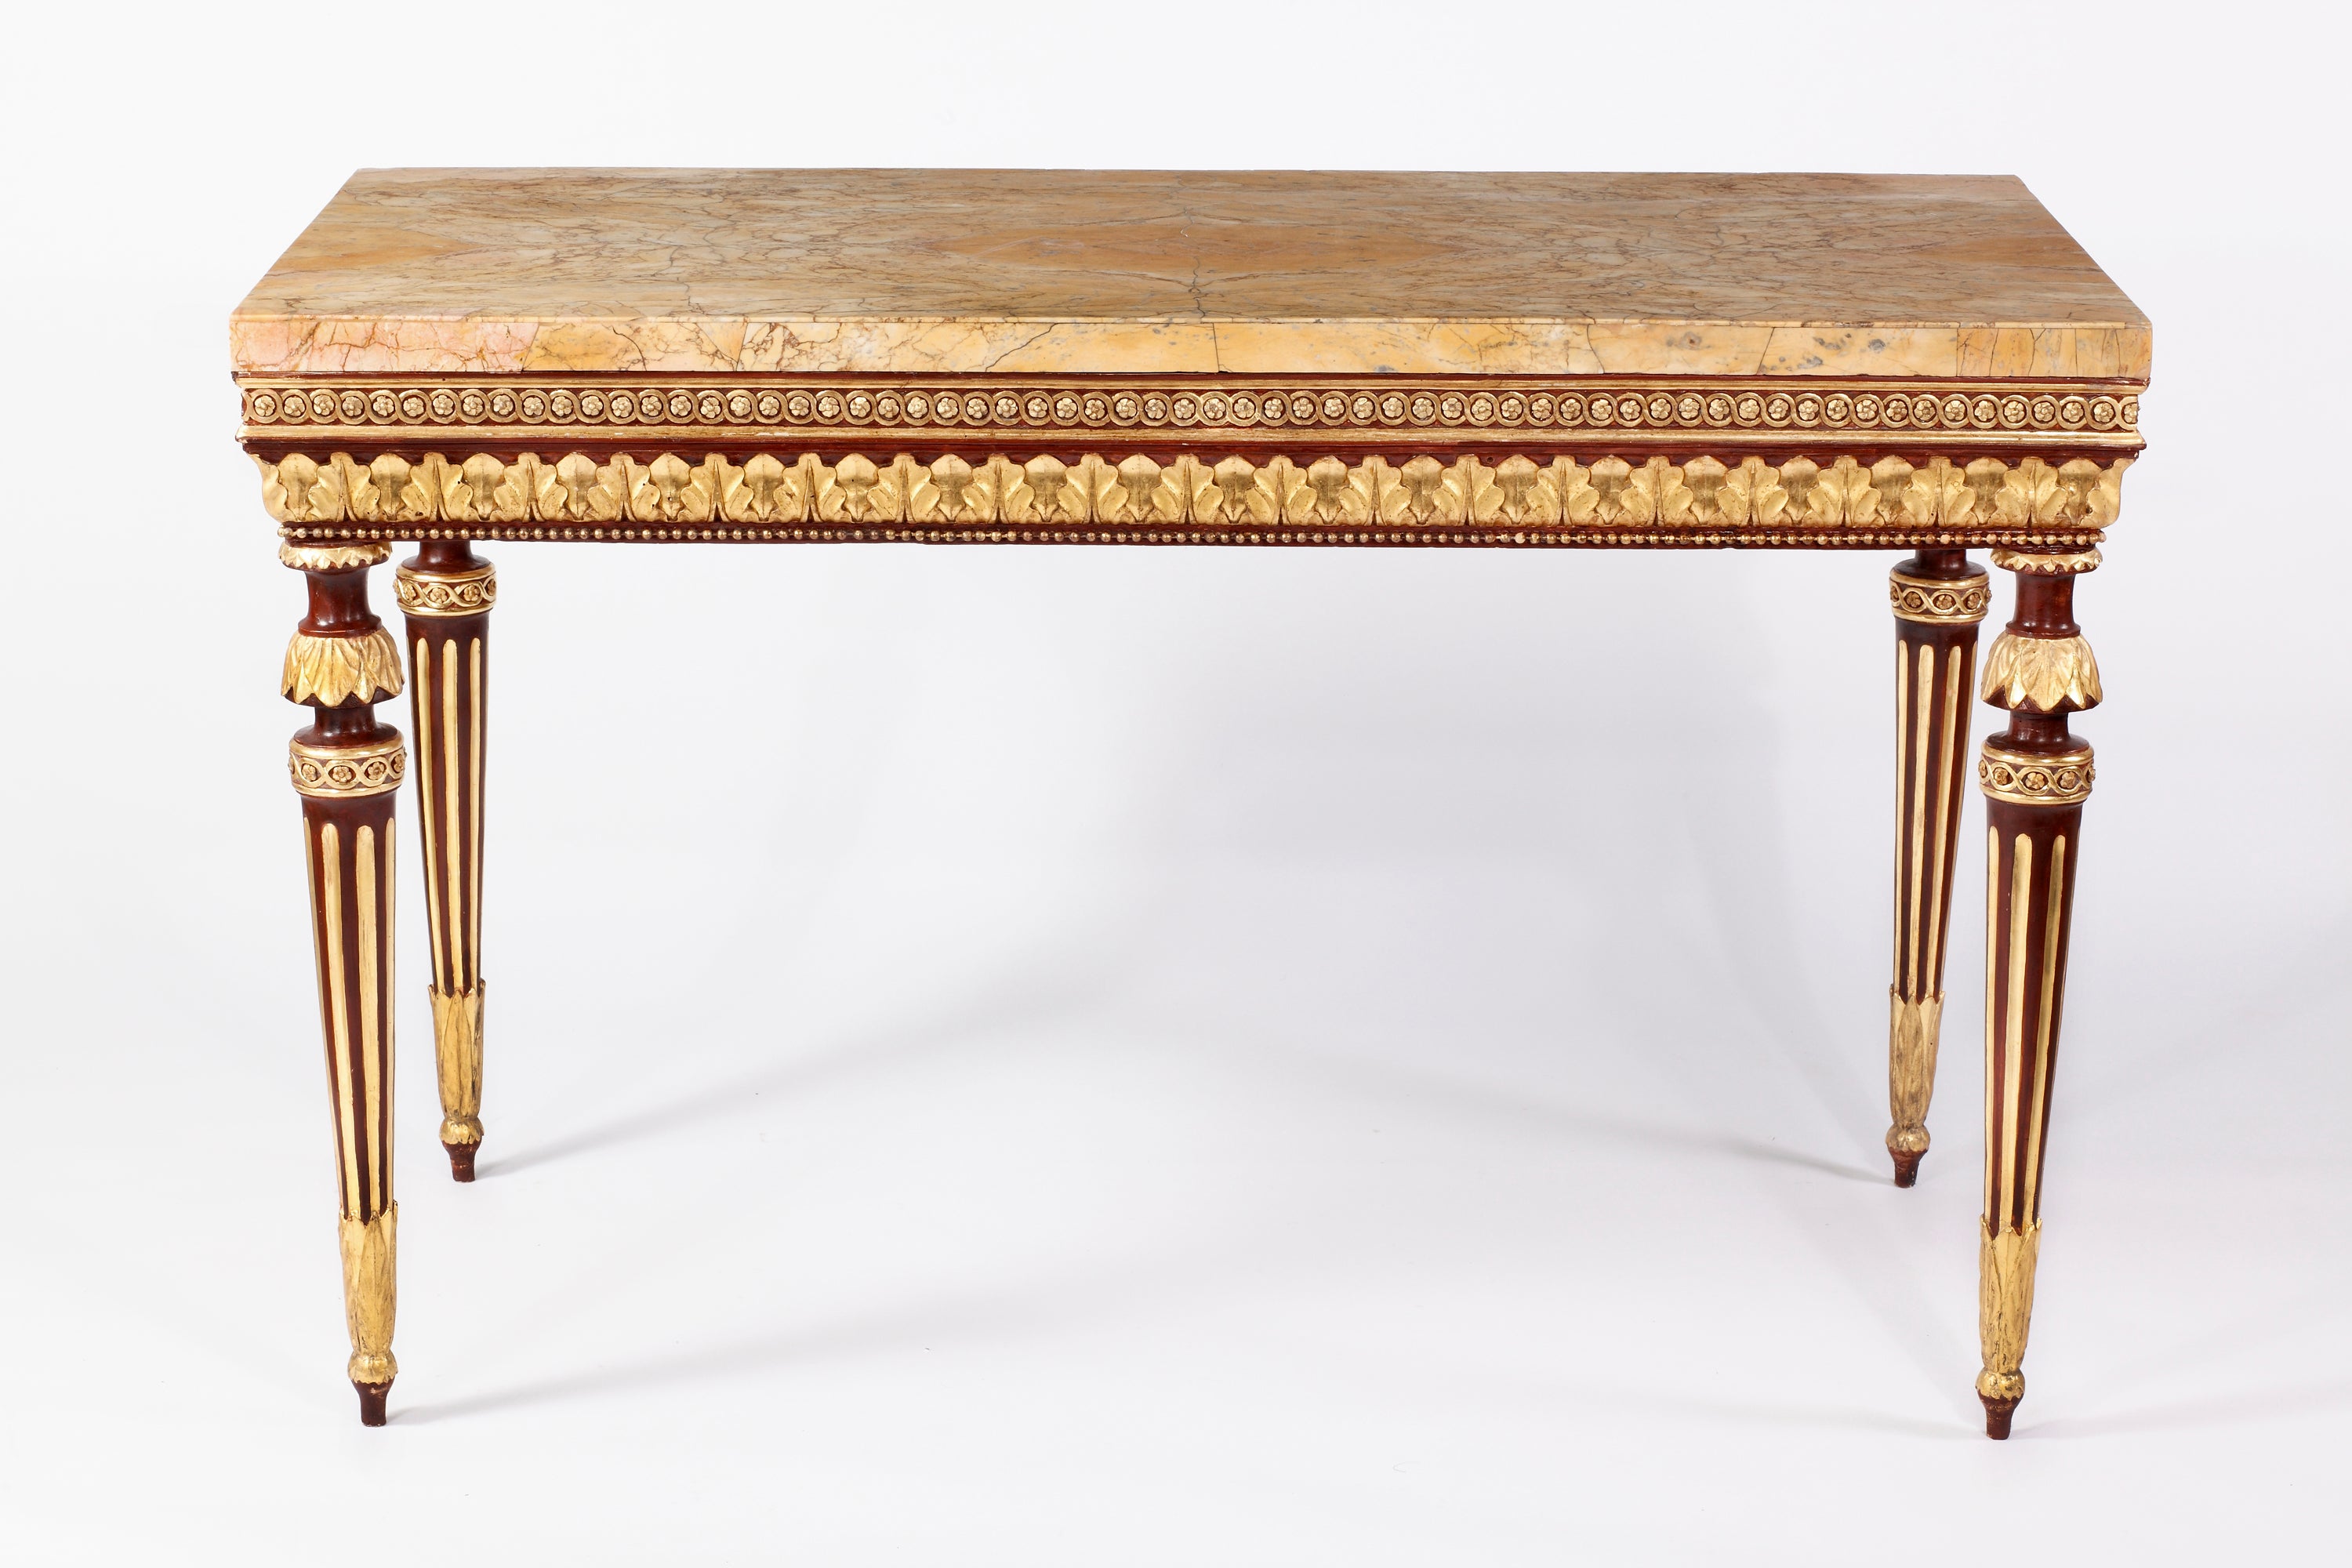 An Important Neoclassical Lacquered & Parcel Gilt Console